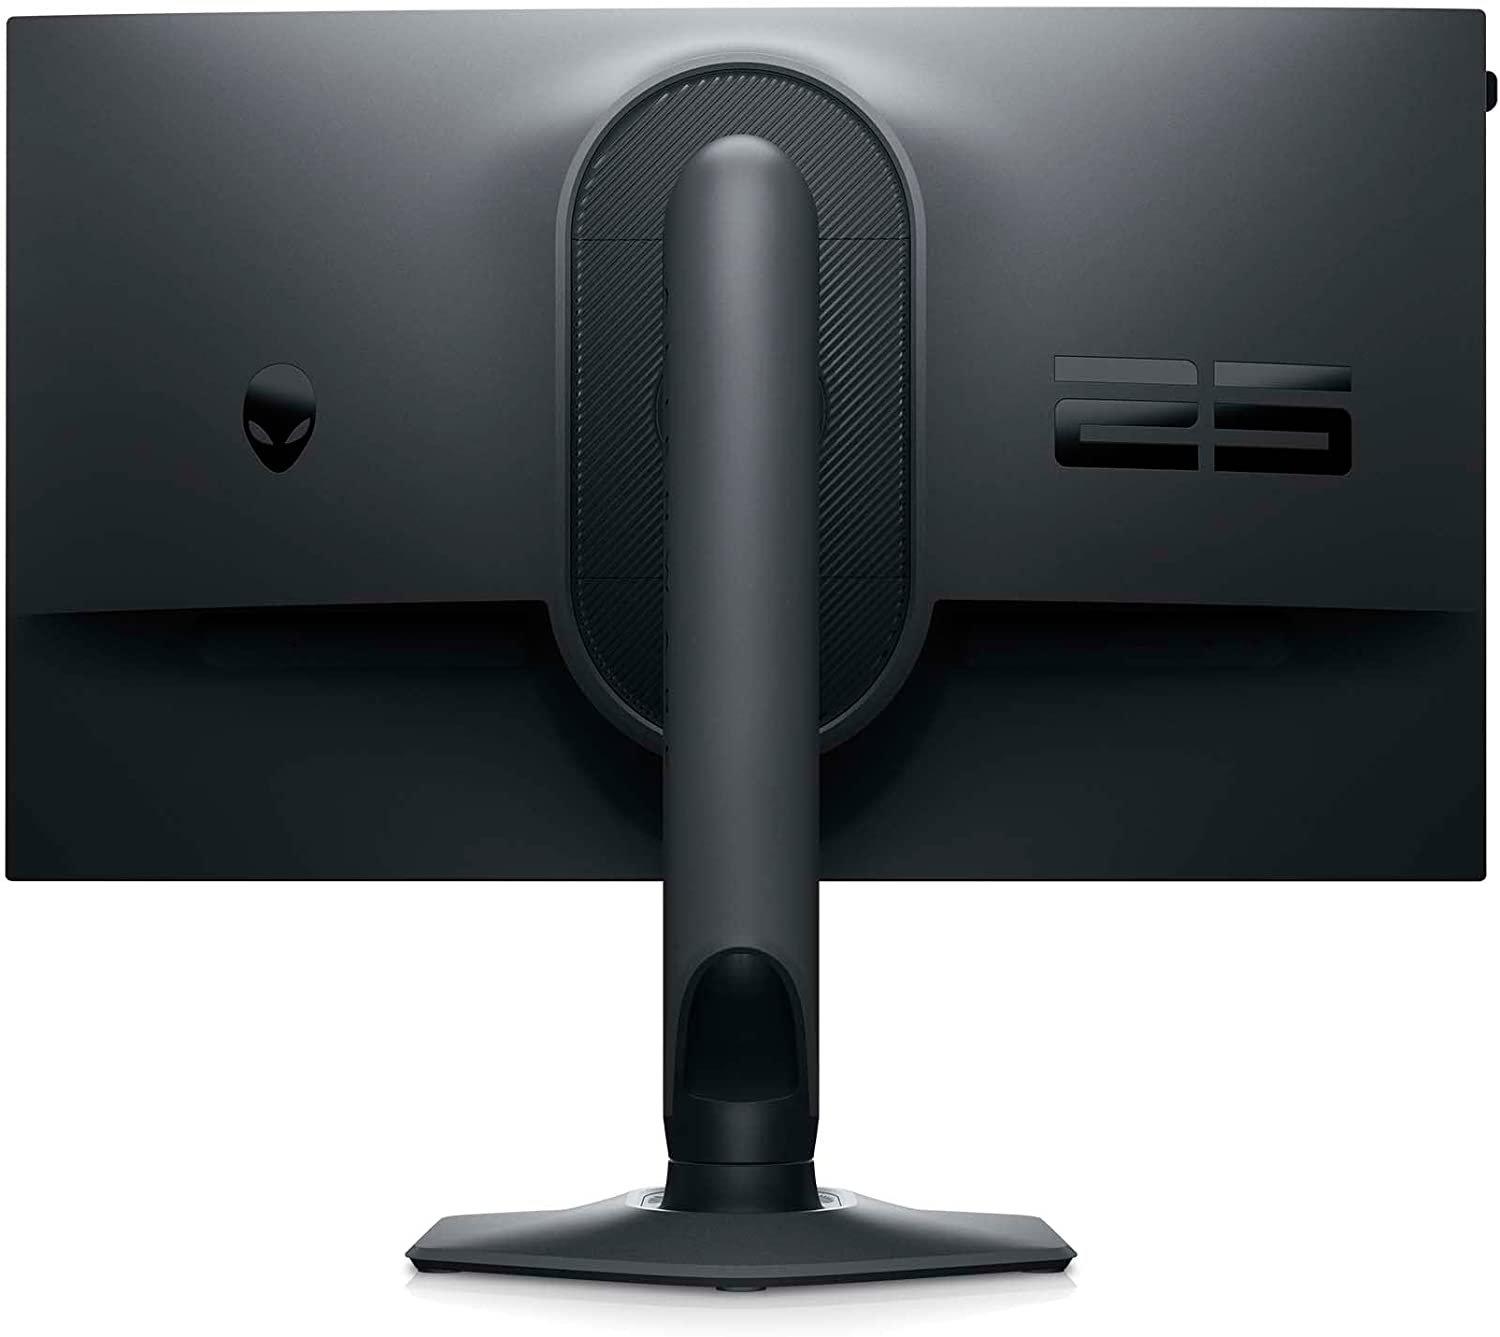 Grab 41% off this 360Hz Alienware gaming monitor